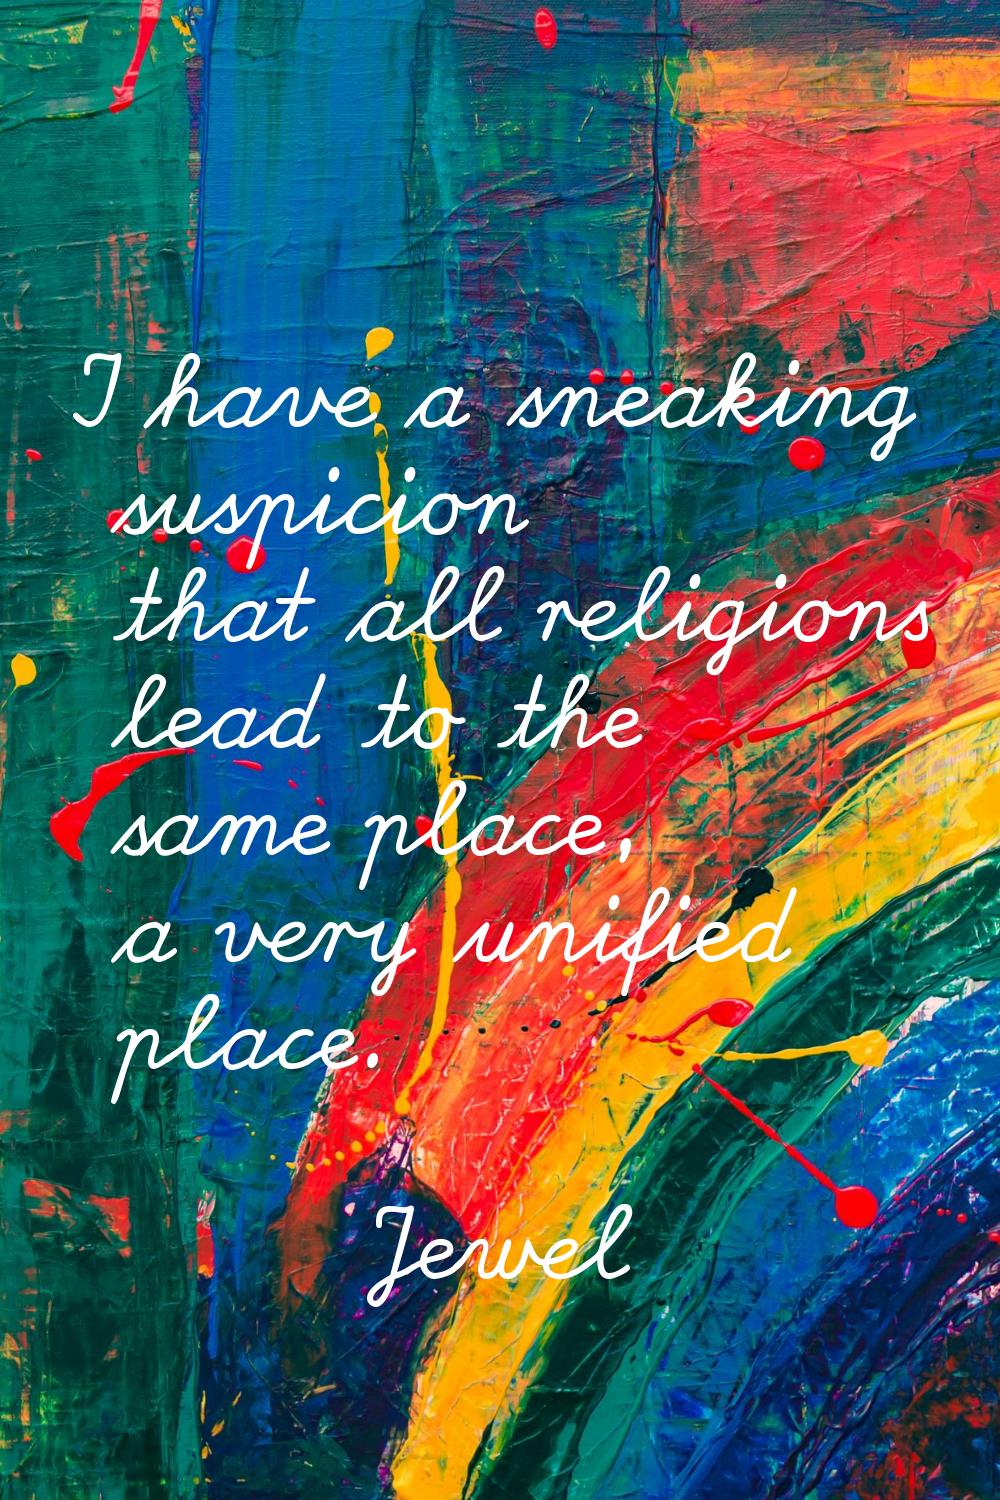 I have a sneaking suspicion that all religions lead to the same place, a very unified place.